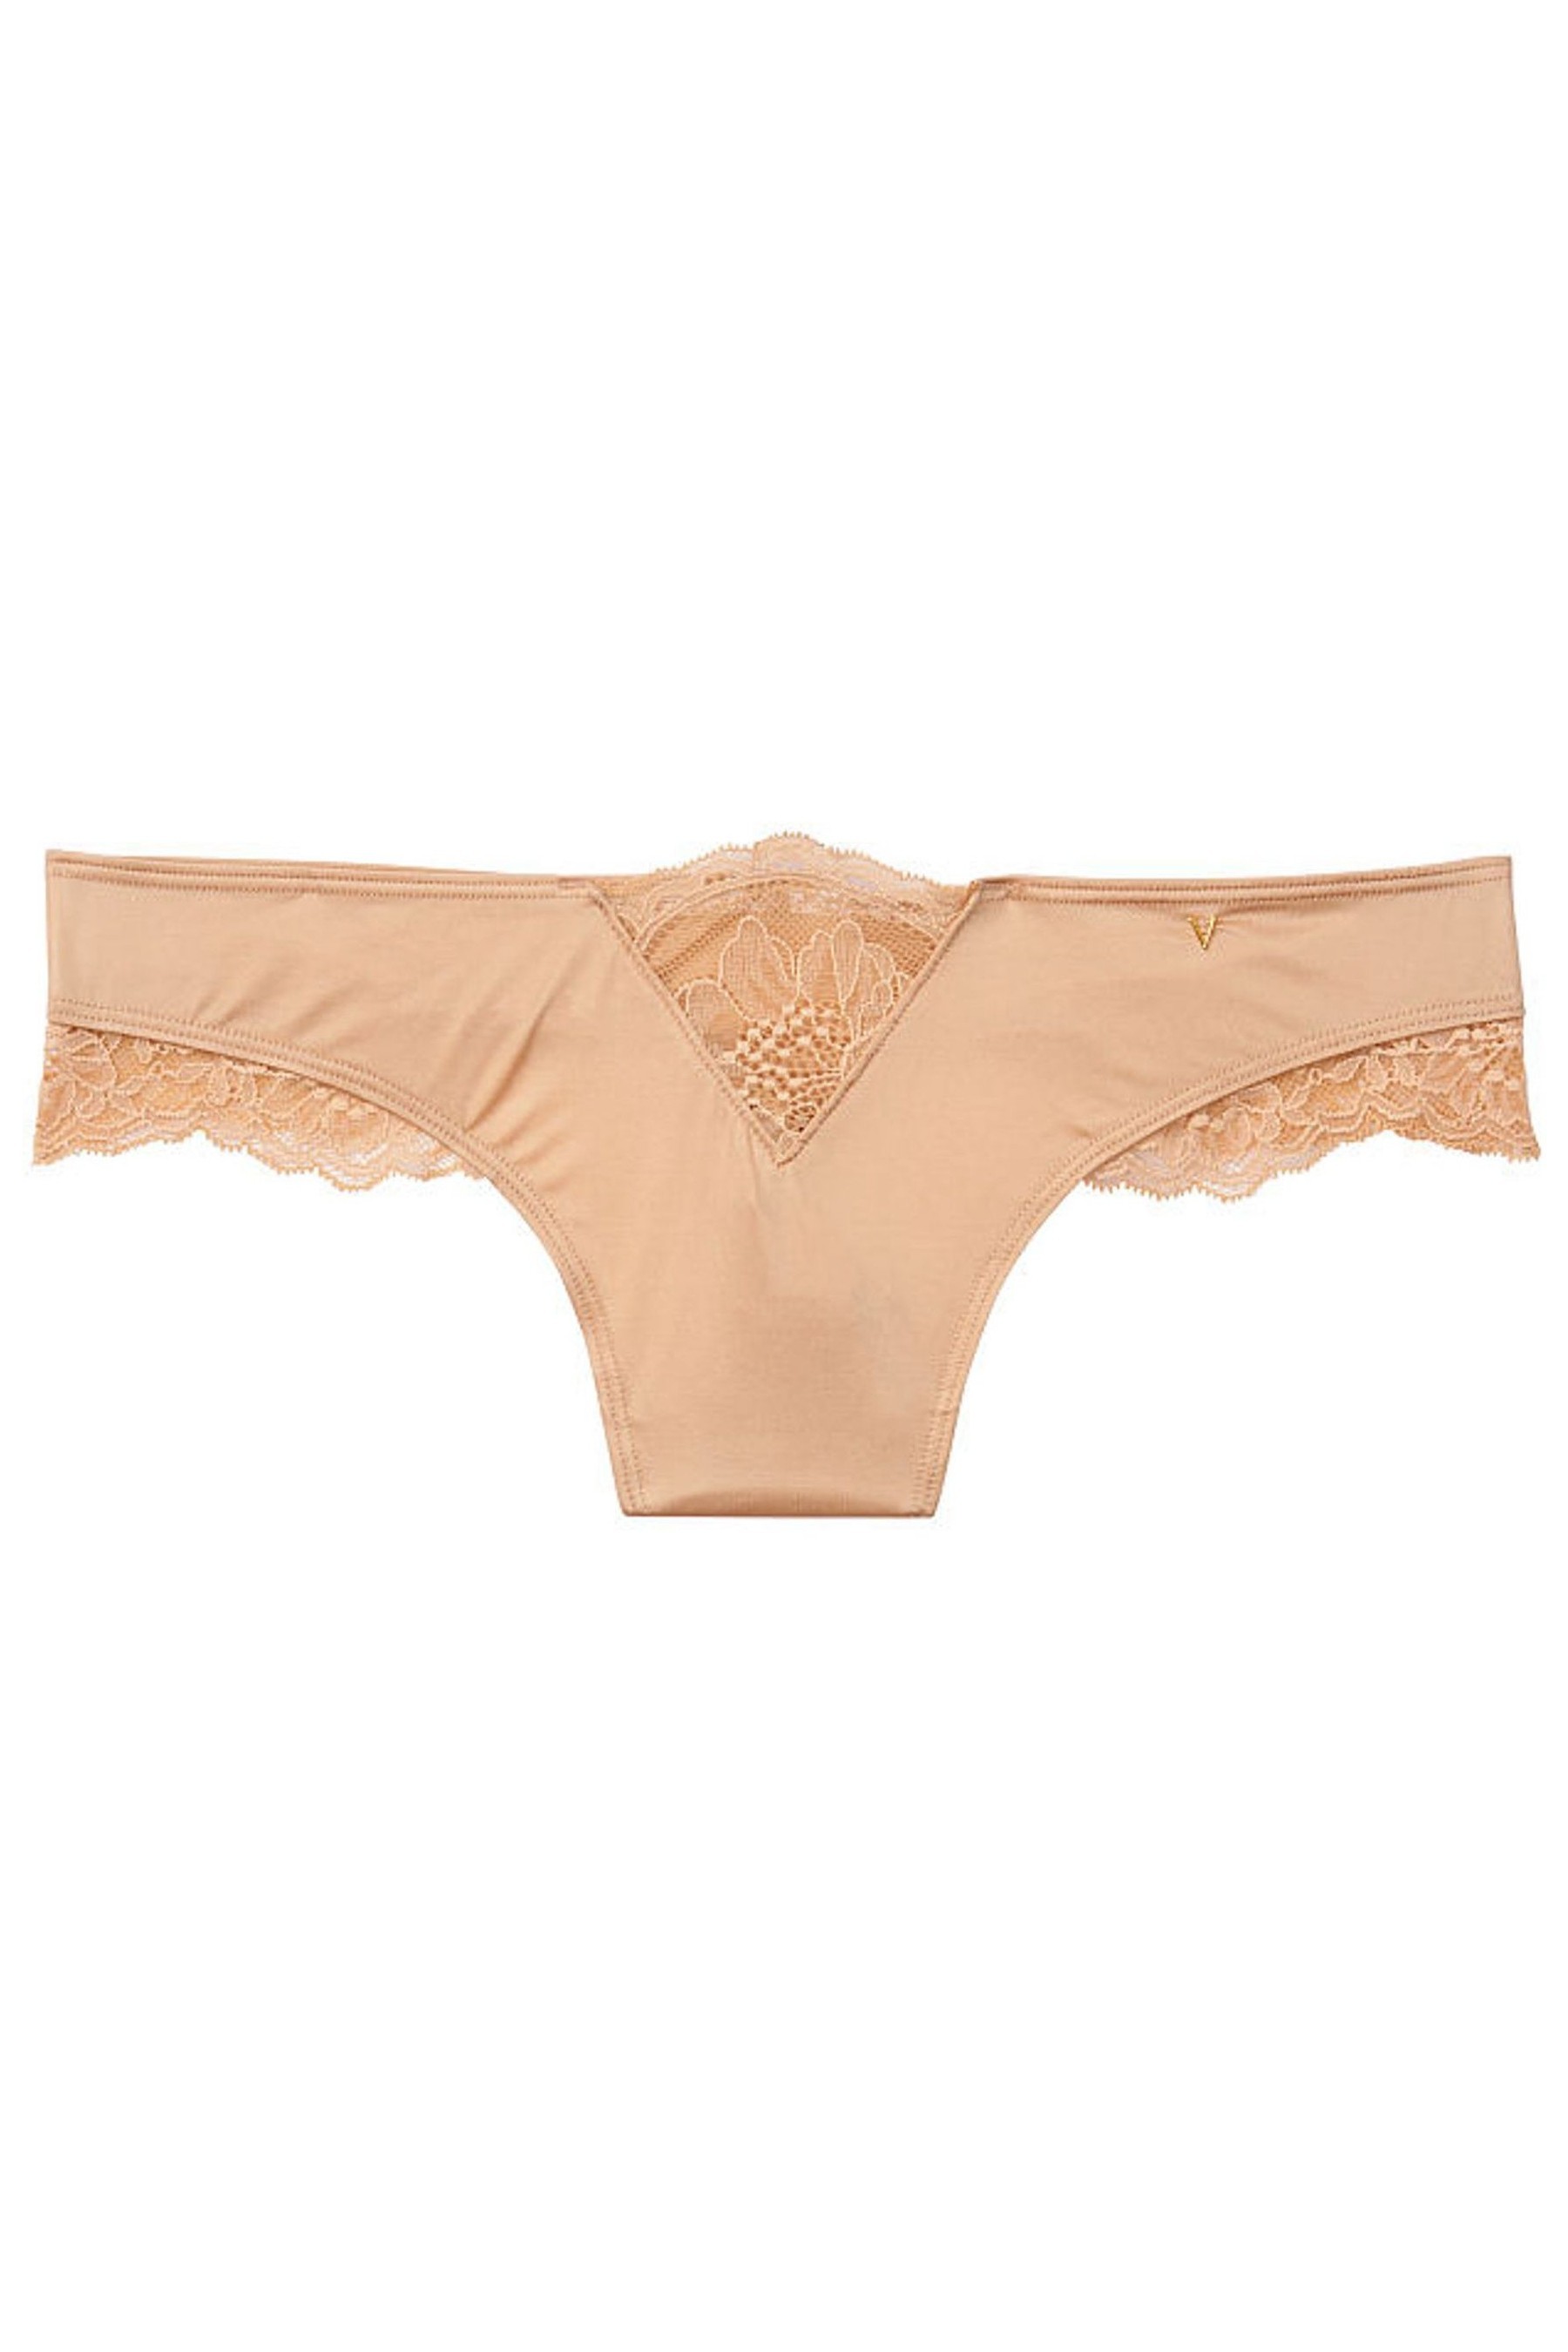 Buy Victoria S Secret Micro Lace Insert Cheeky Thong From The Victoria S Secret Uk Online Shop